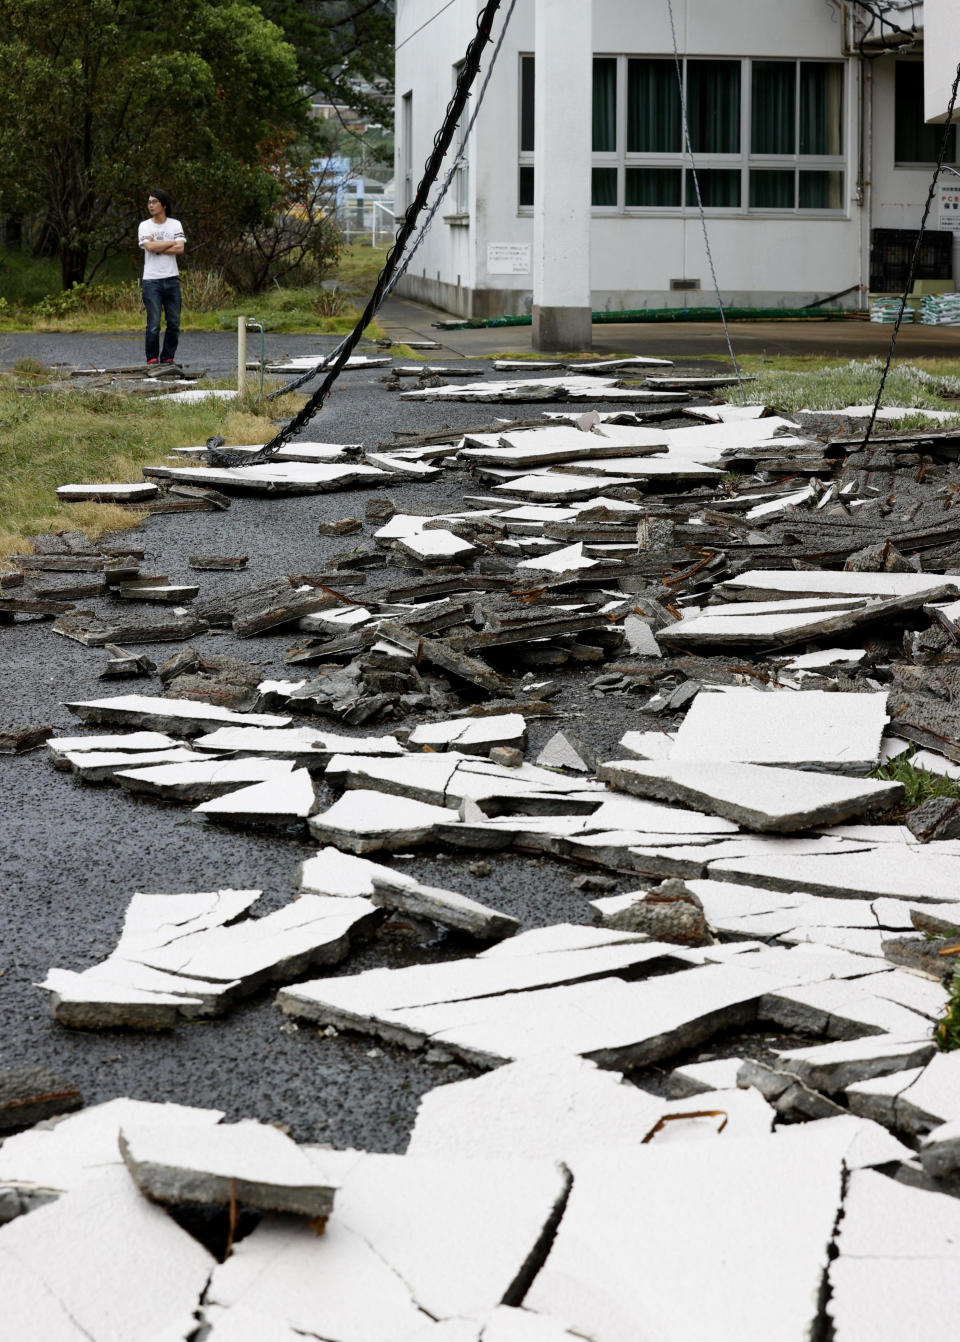 The outer walls of a gymnasium are scattered outside following a typhoon in Nagasaki, southwestern Japan Monday, Sept. 7, 2020. The second powerful typhoon to slam Japan in a week left people injured, damaged buildings, caused blackouts at nearly half a million homes and paralyzed traffic in southern Japanese islands before headed to South Korea.(Kyodo News via AP)